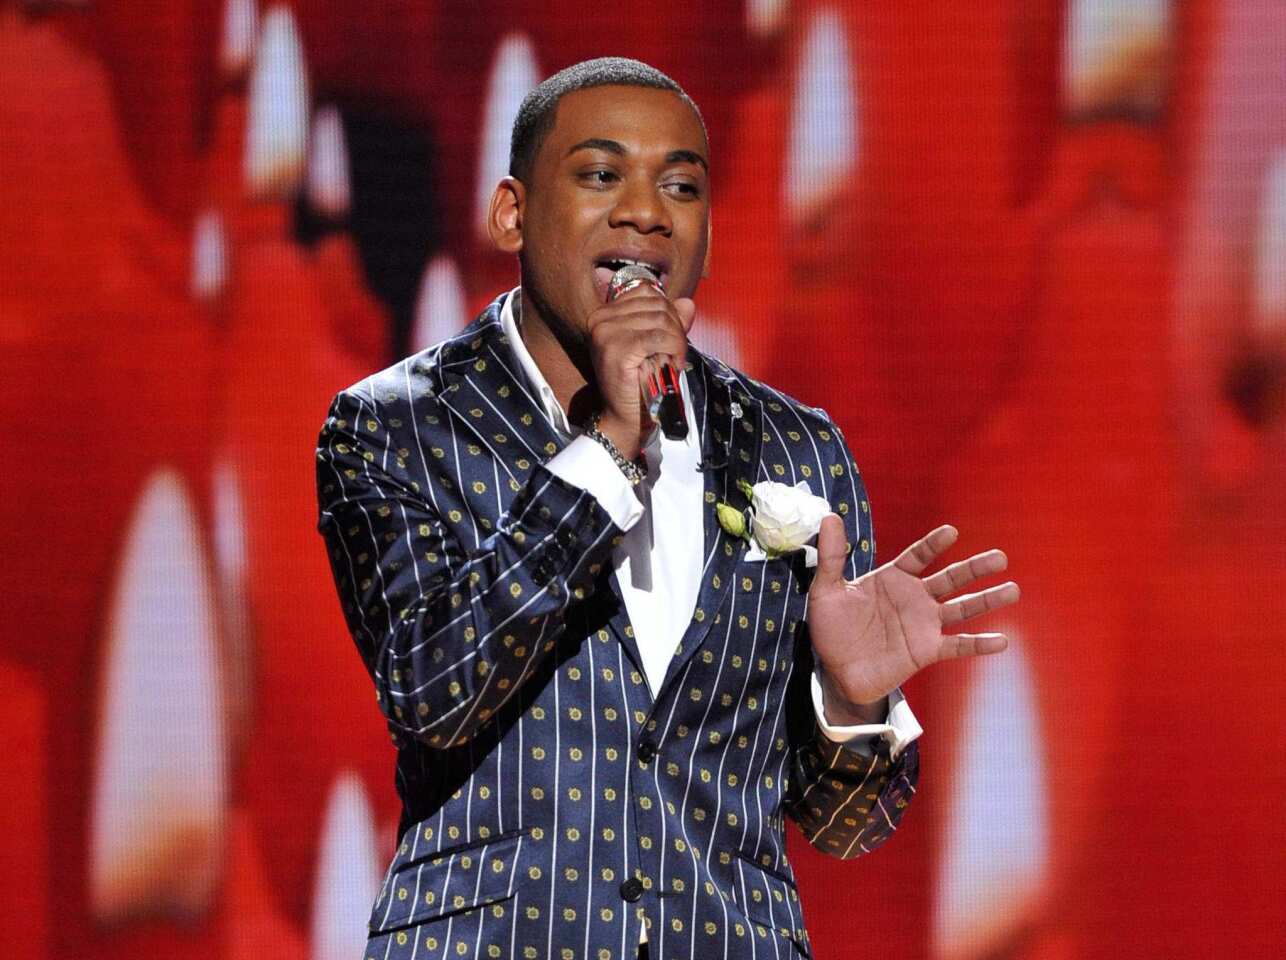 Joshua Ledet is the third man out on "Idol"